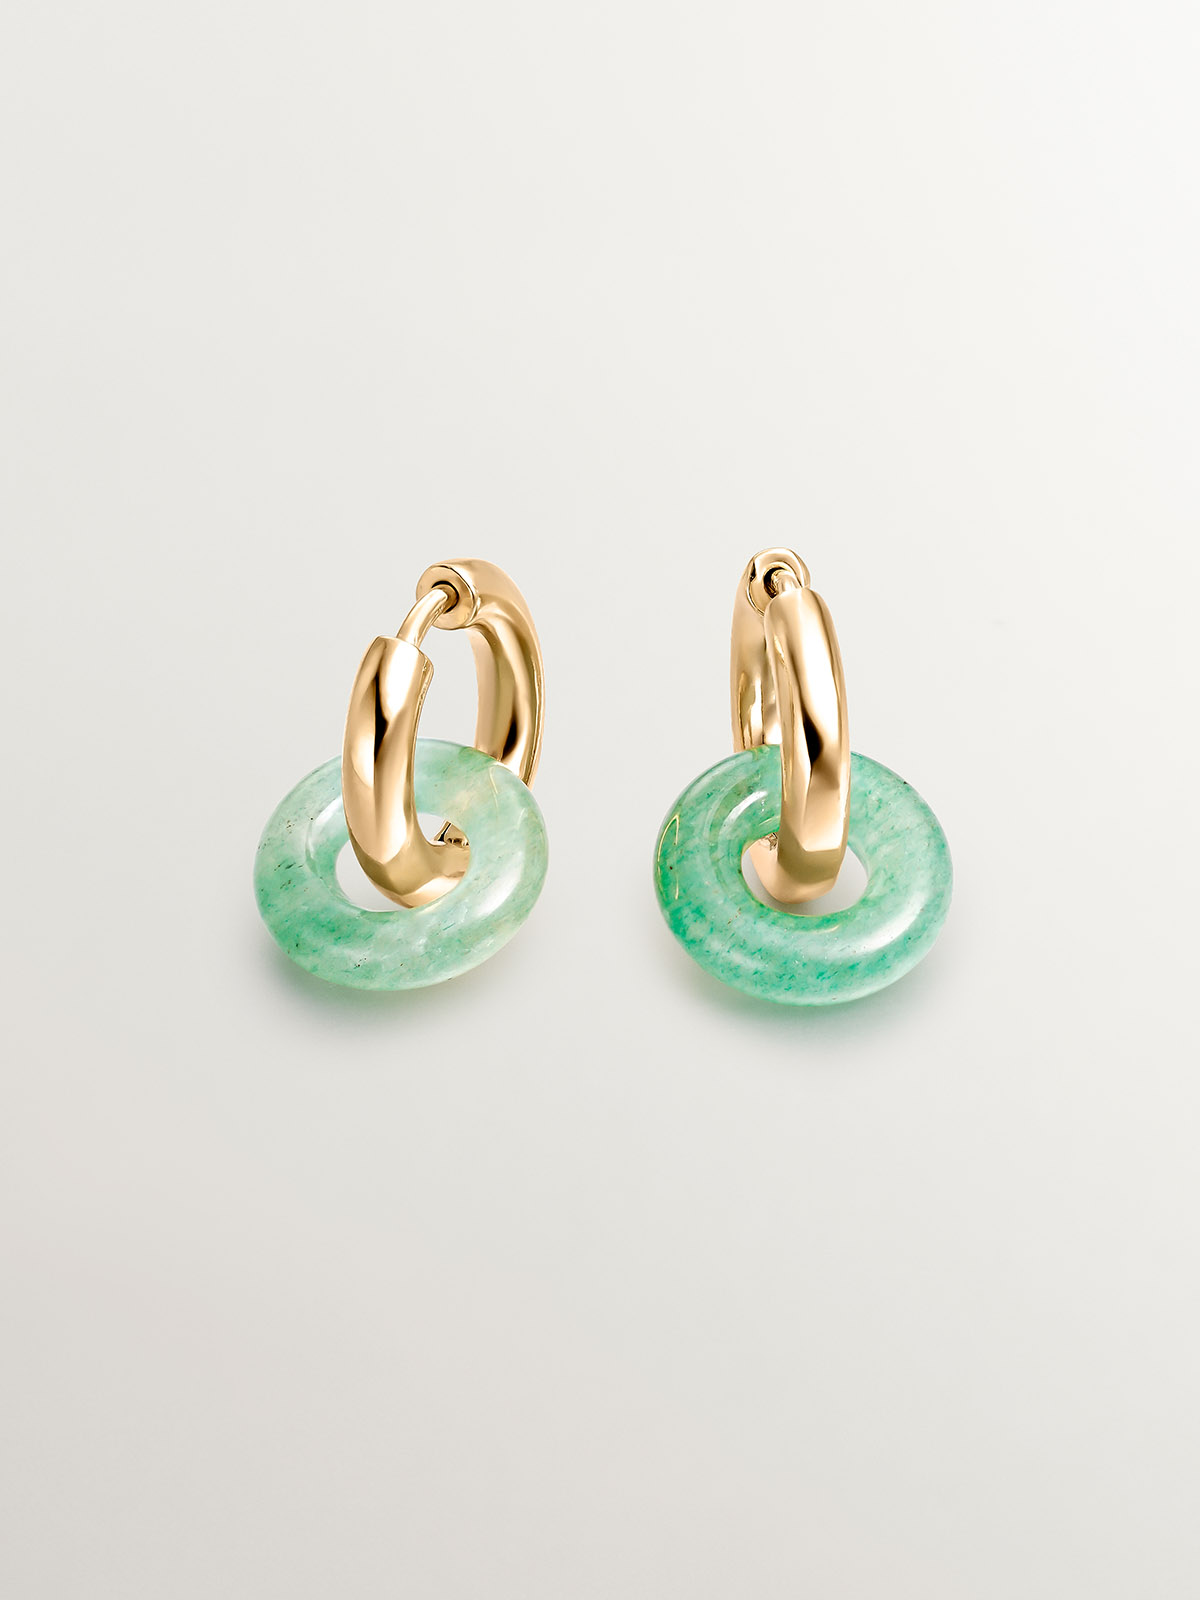 Medium hoop earrings made of 925 silver bathed in 18K yellow gold with green aventurine